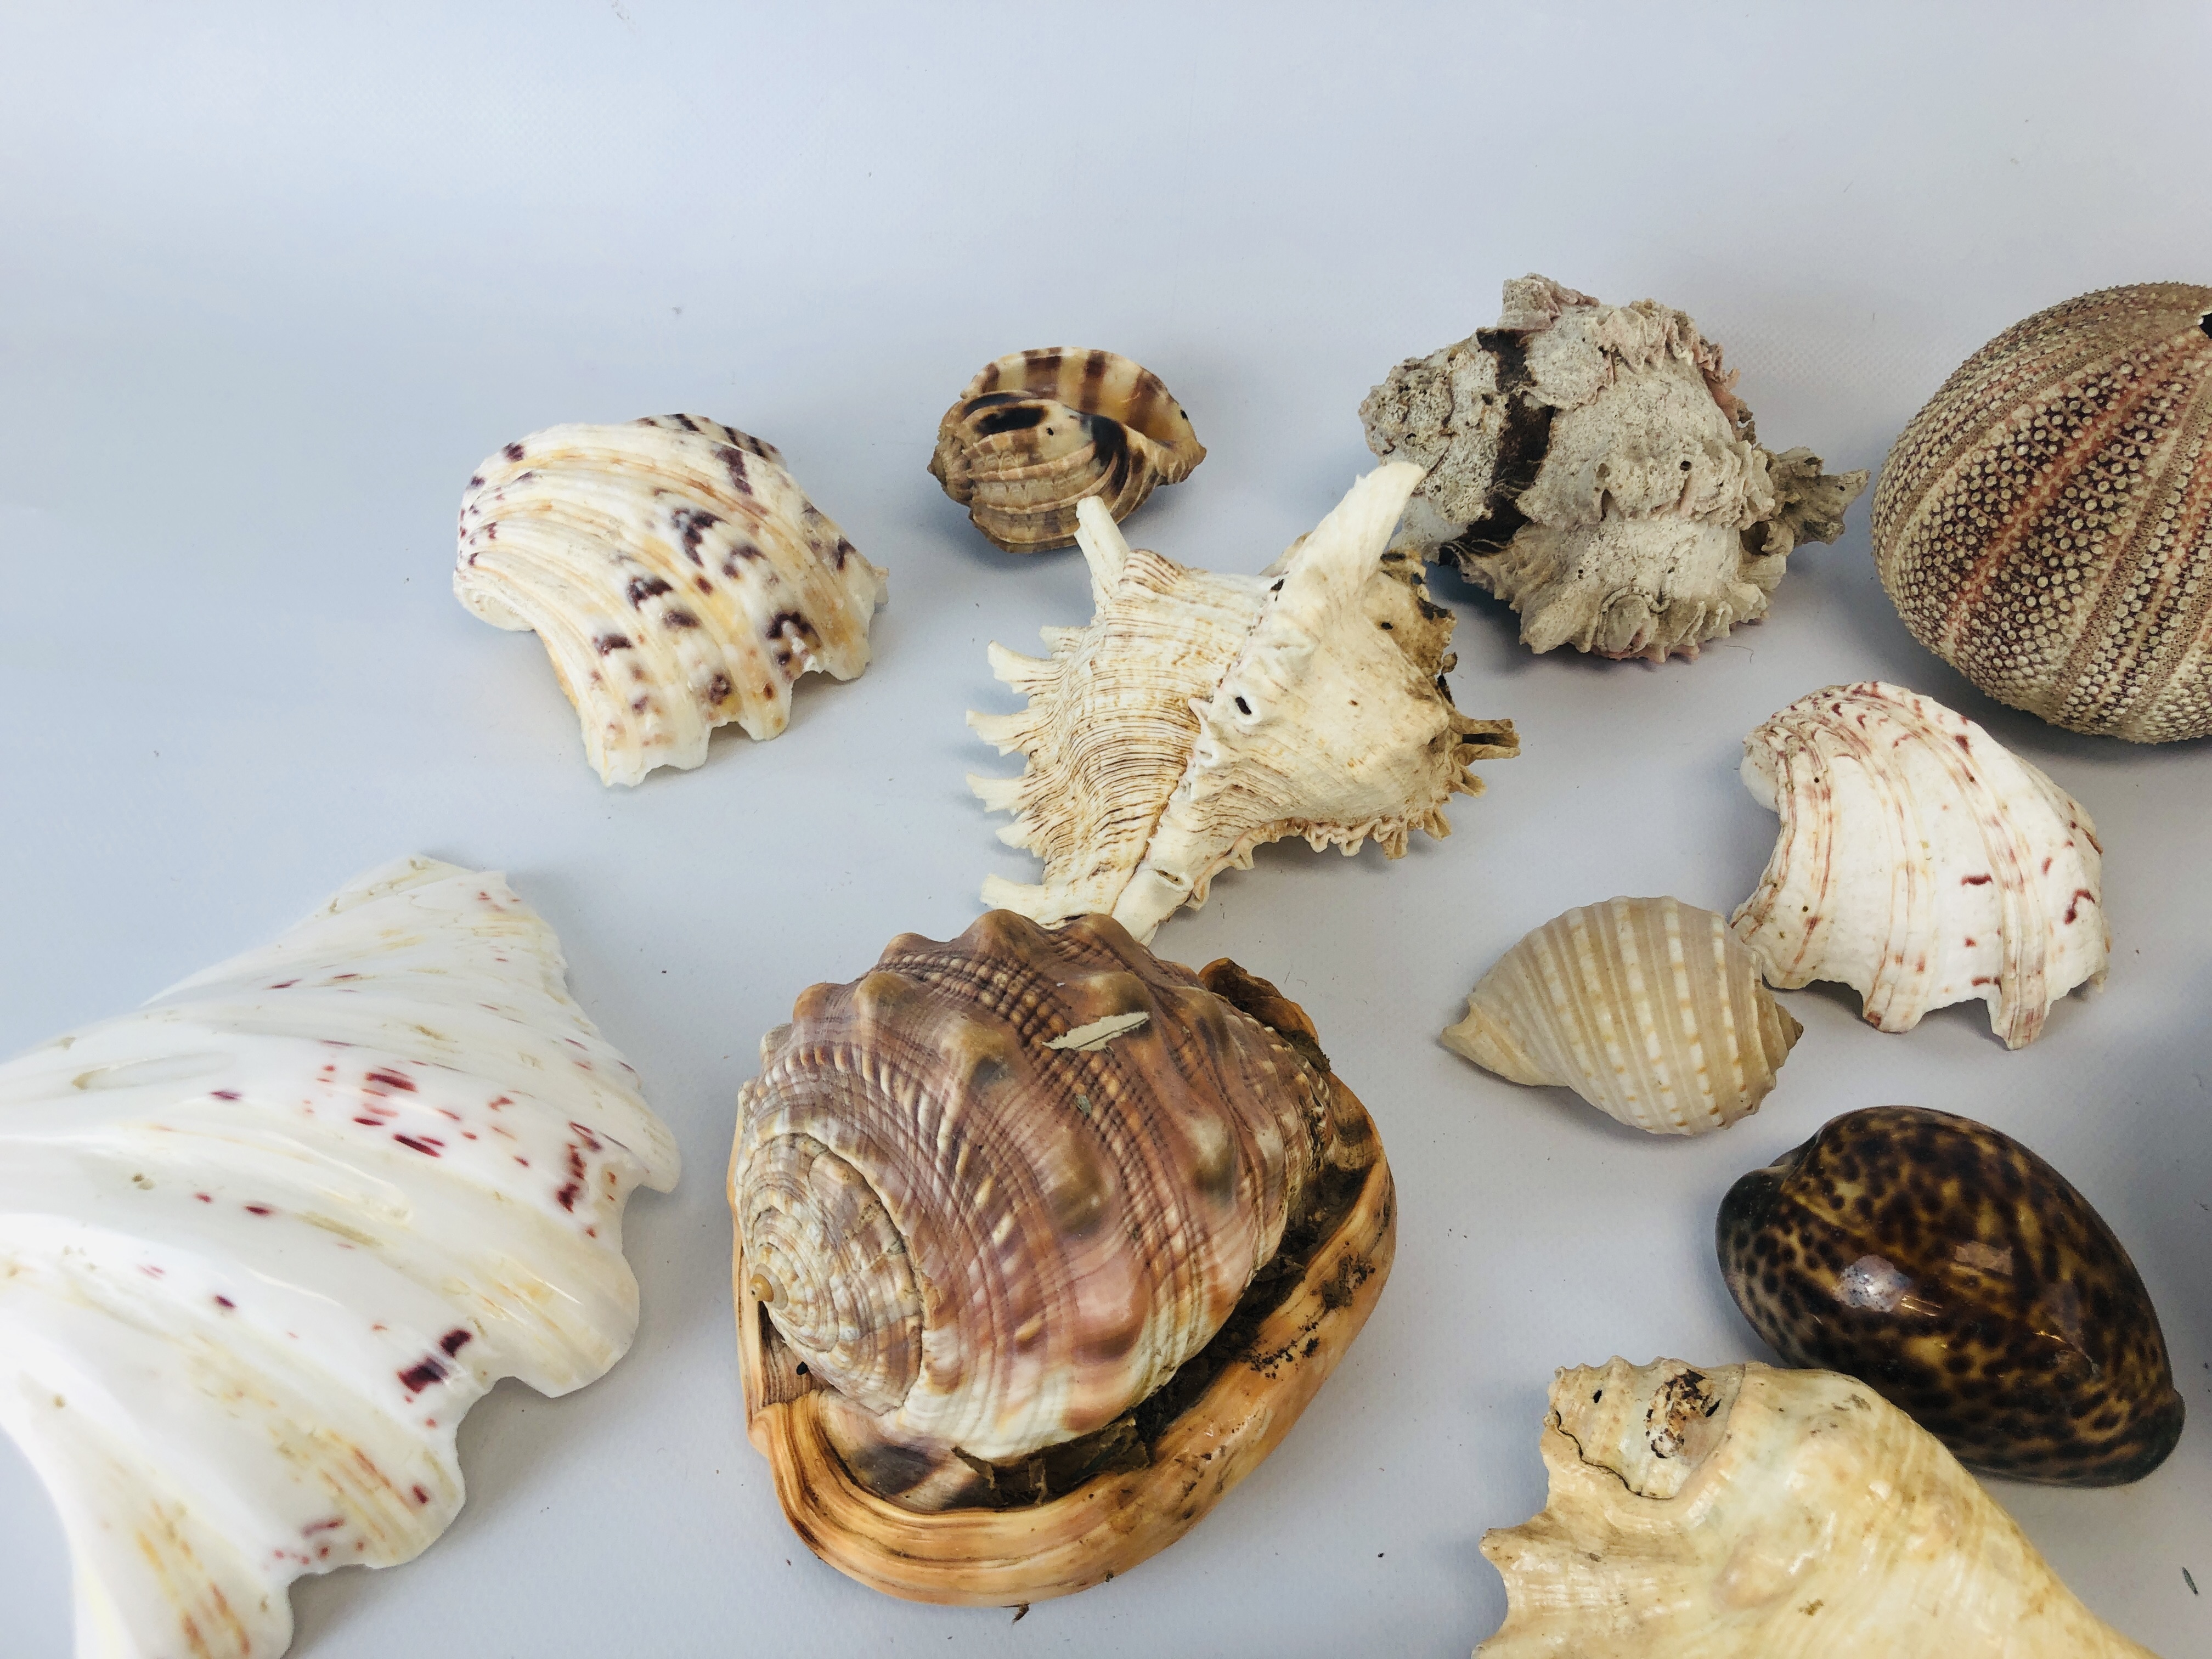 A BOX CONTAINING A LARGE COLLECTION OF ASSORTED SHELLS. - Image 5 of 6